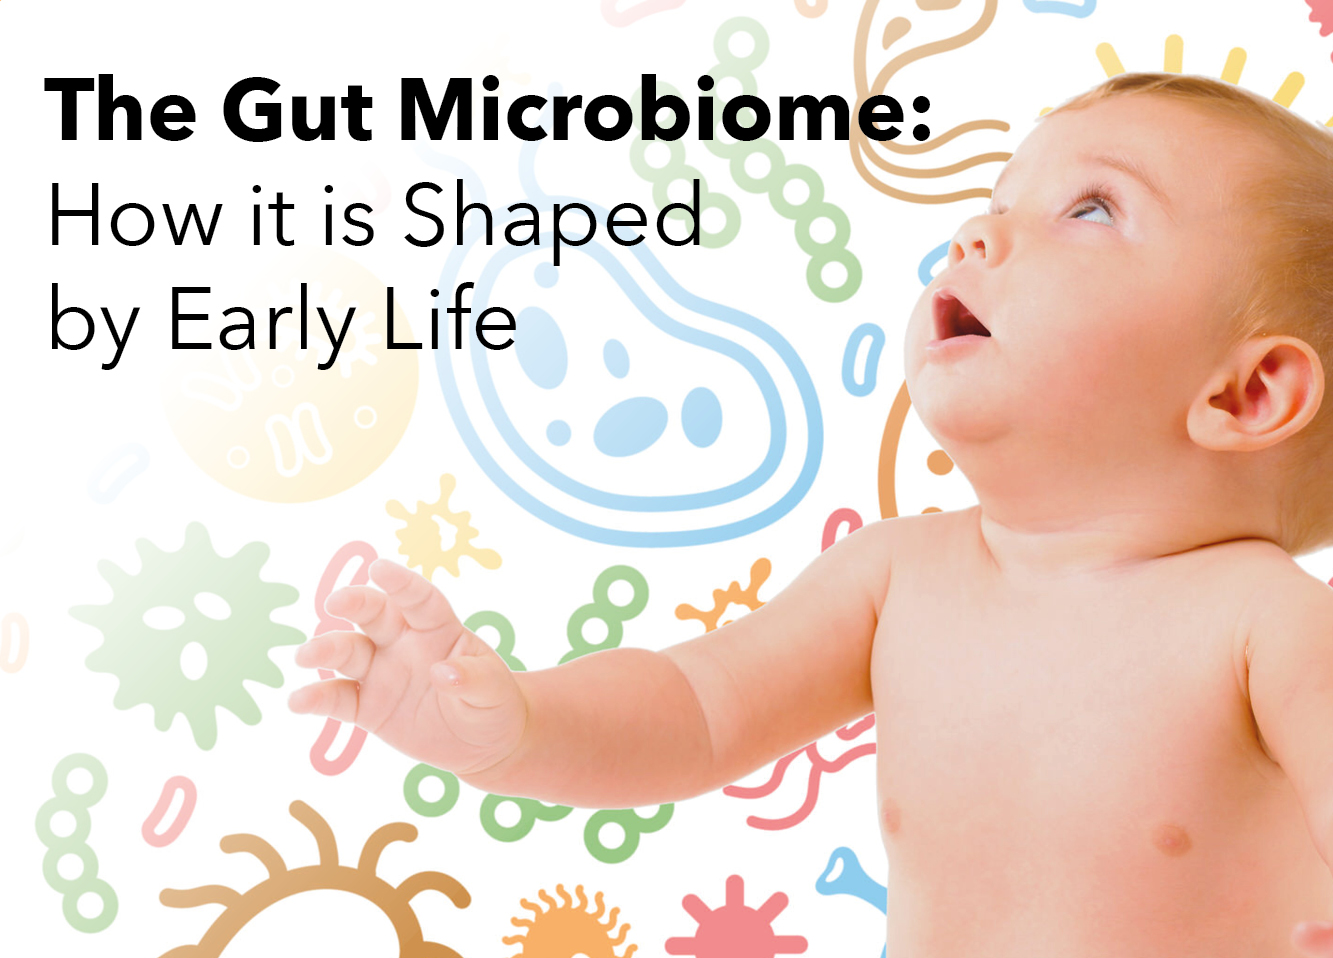 The Gut Microbiome: How it is Shaped by Early Life